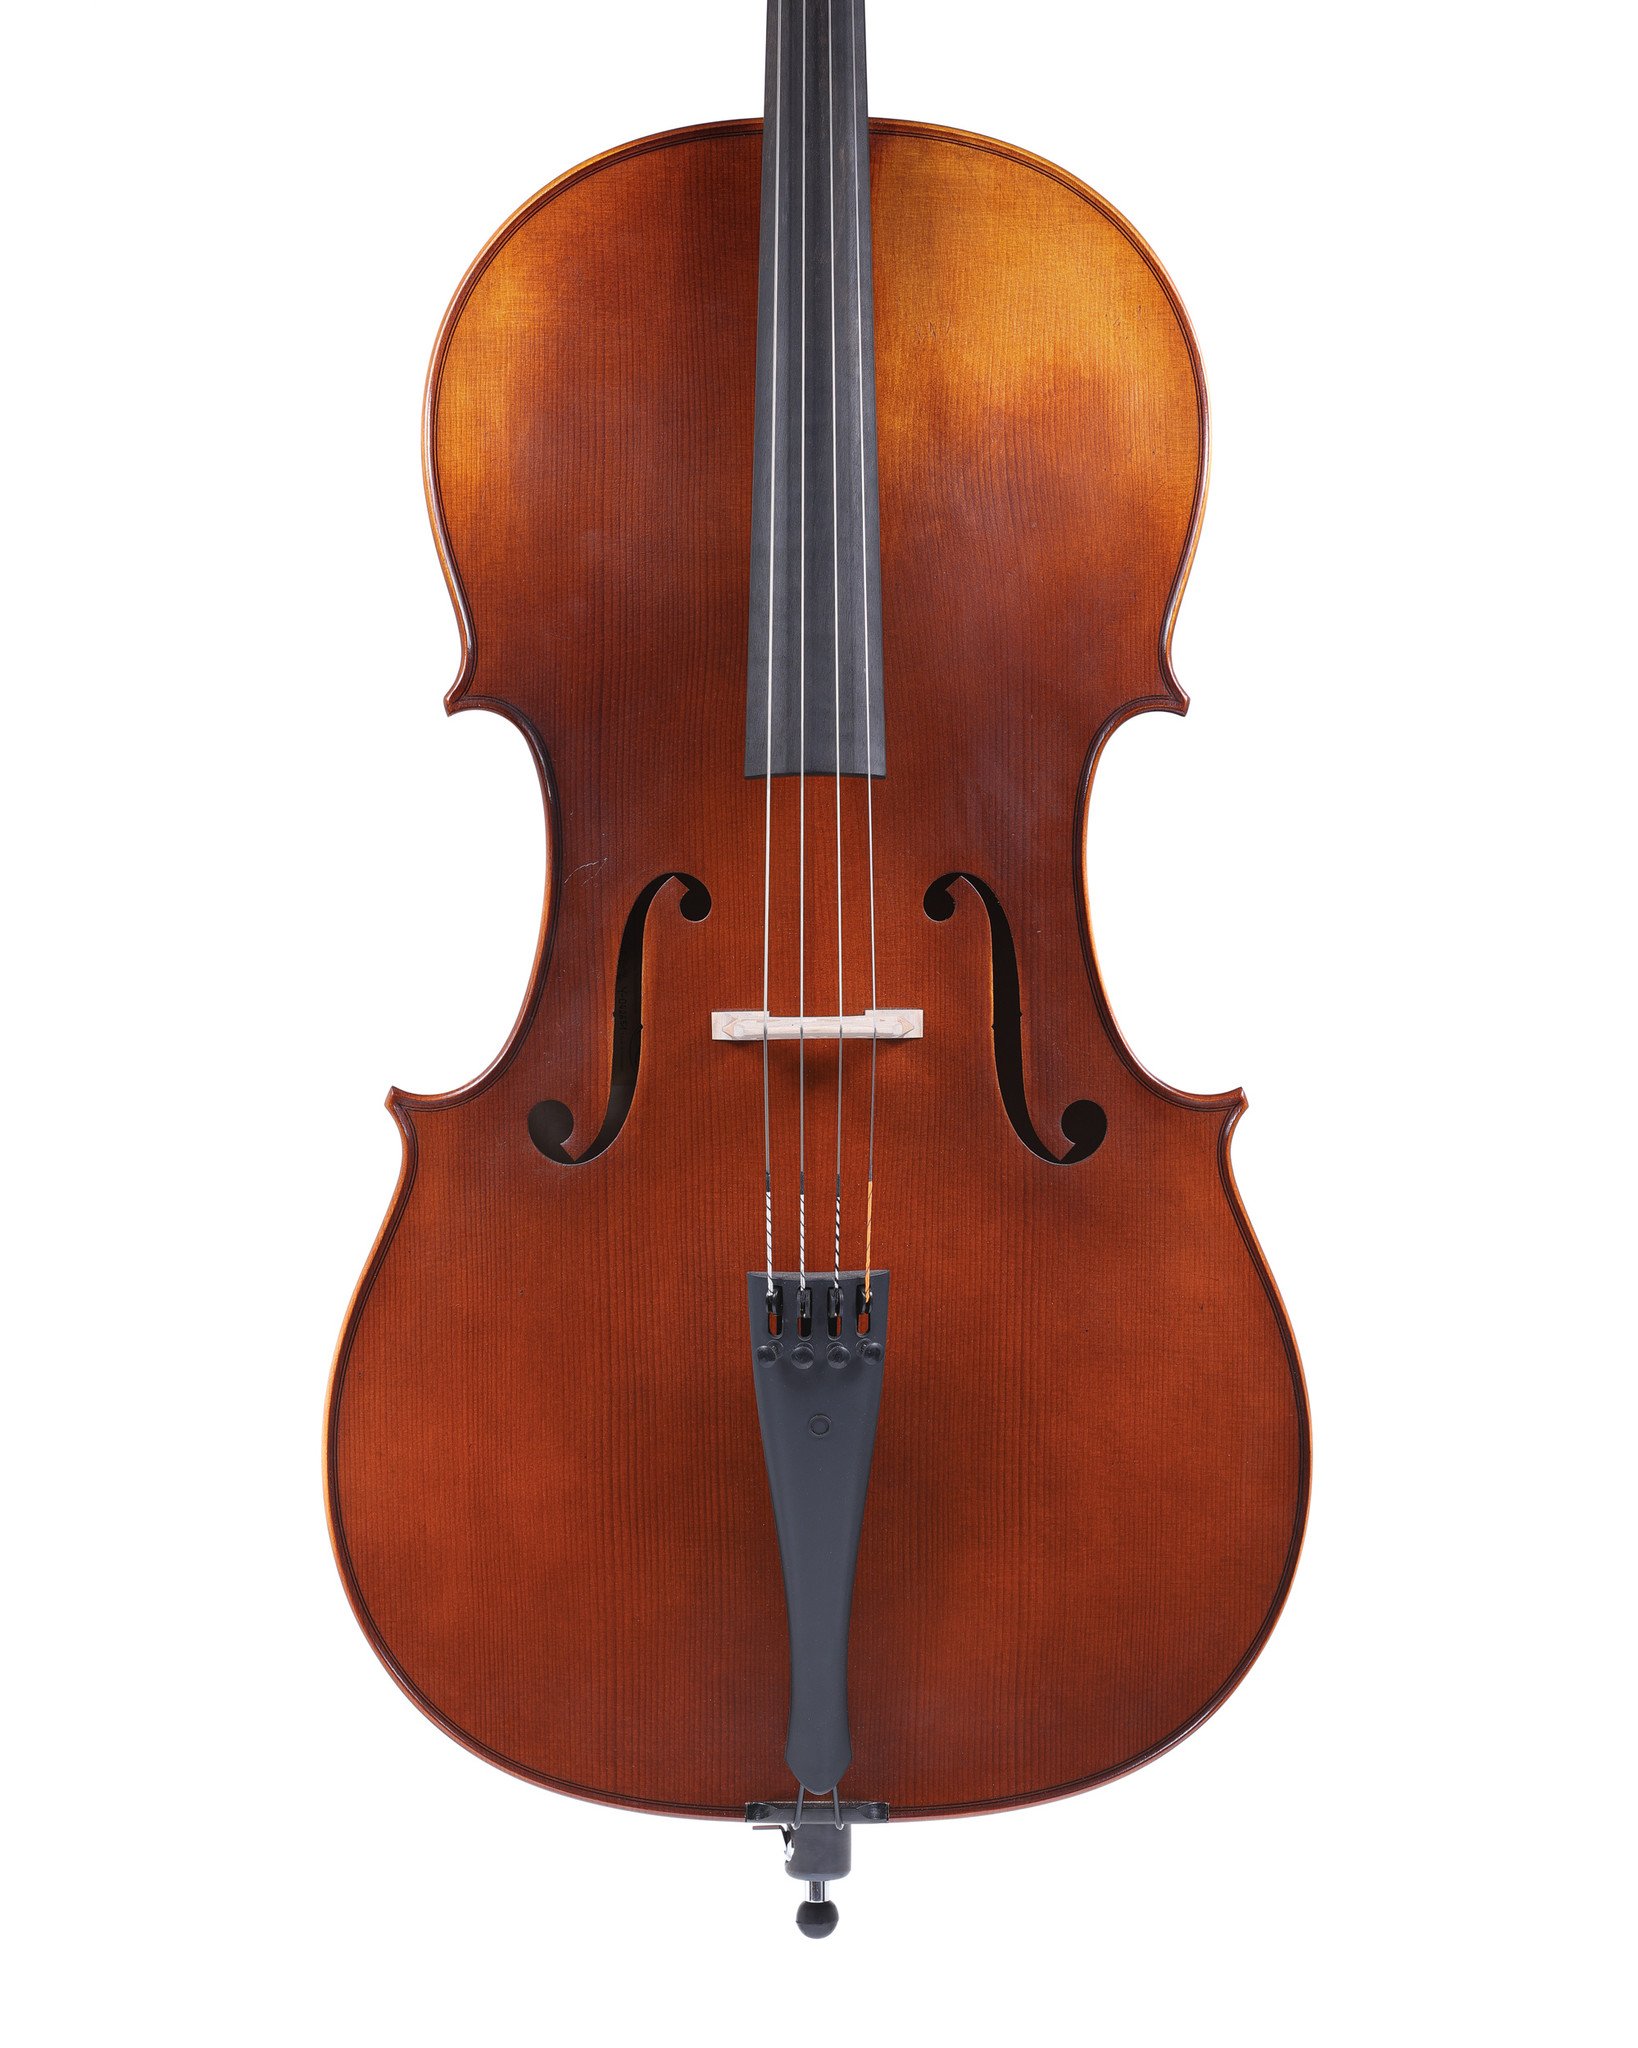 Shop 2022, cello, Metzler GERMANY Paesold Roderich - Violin